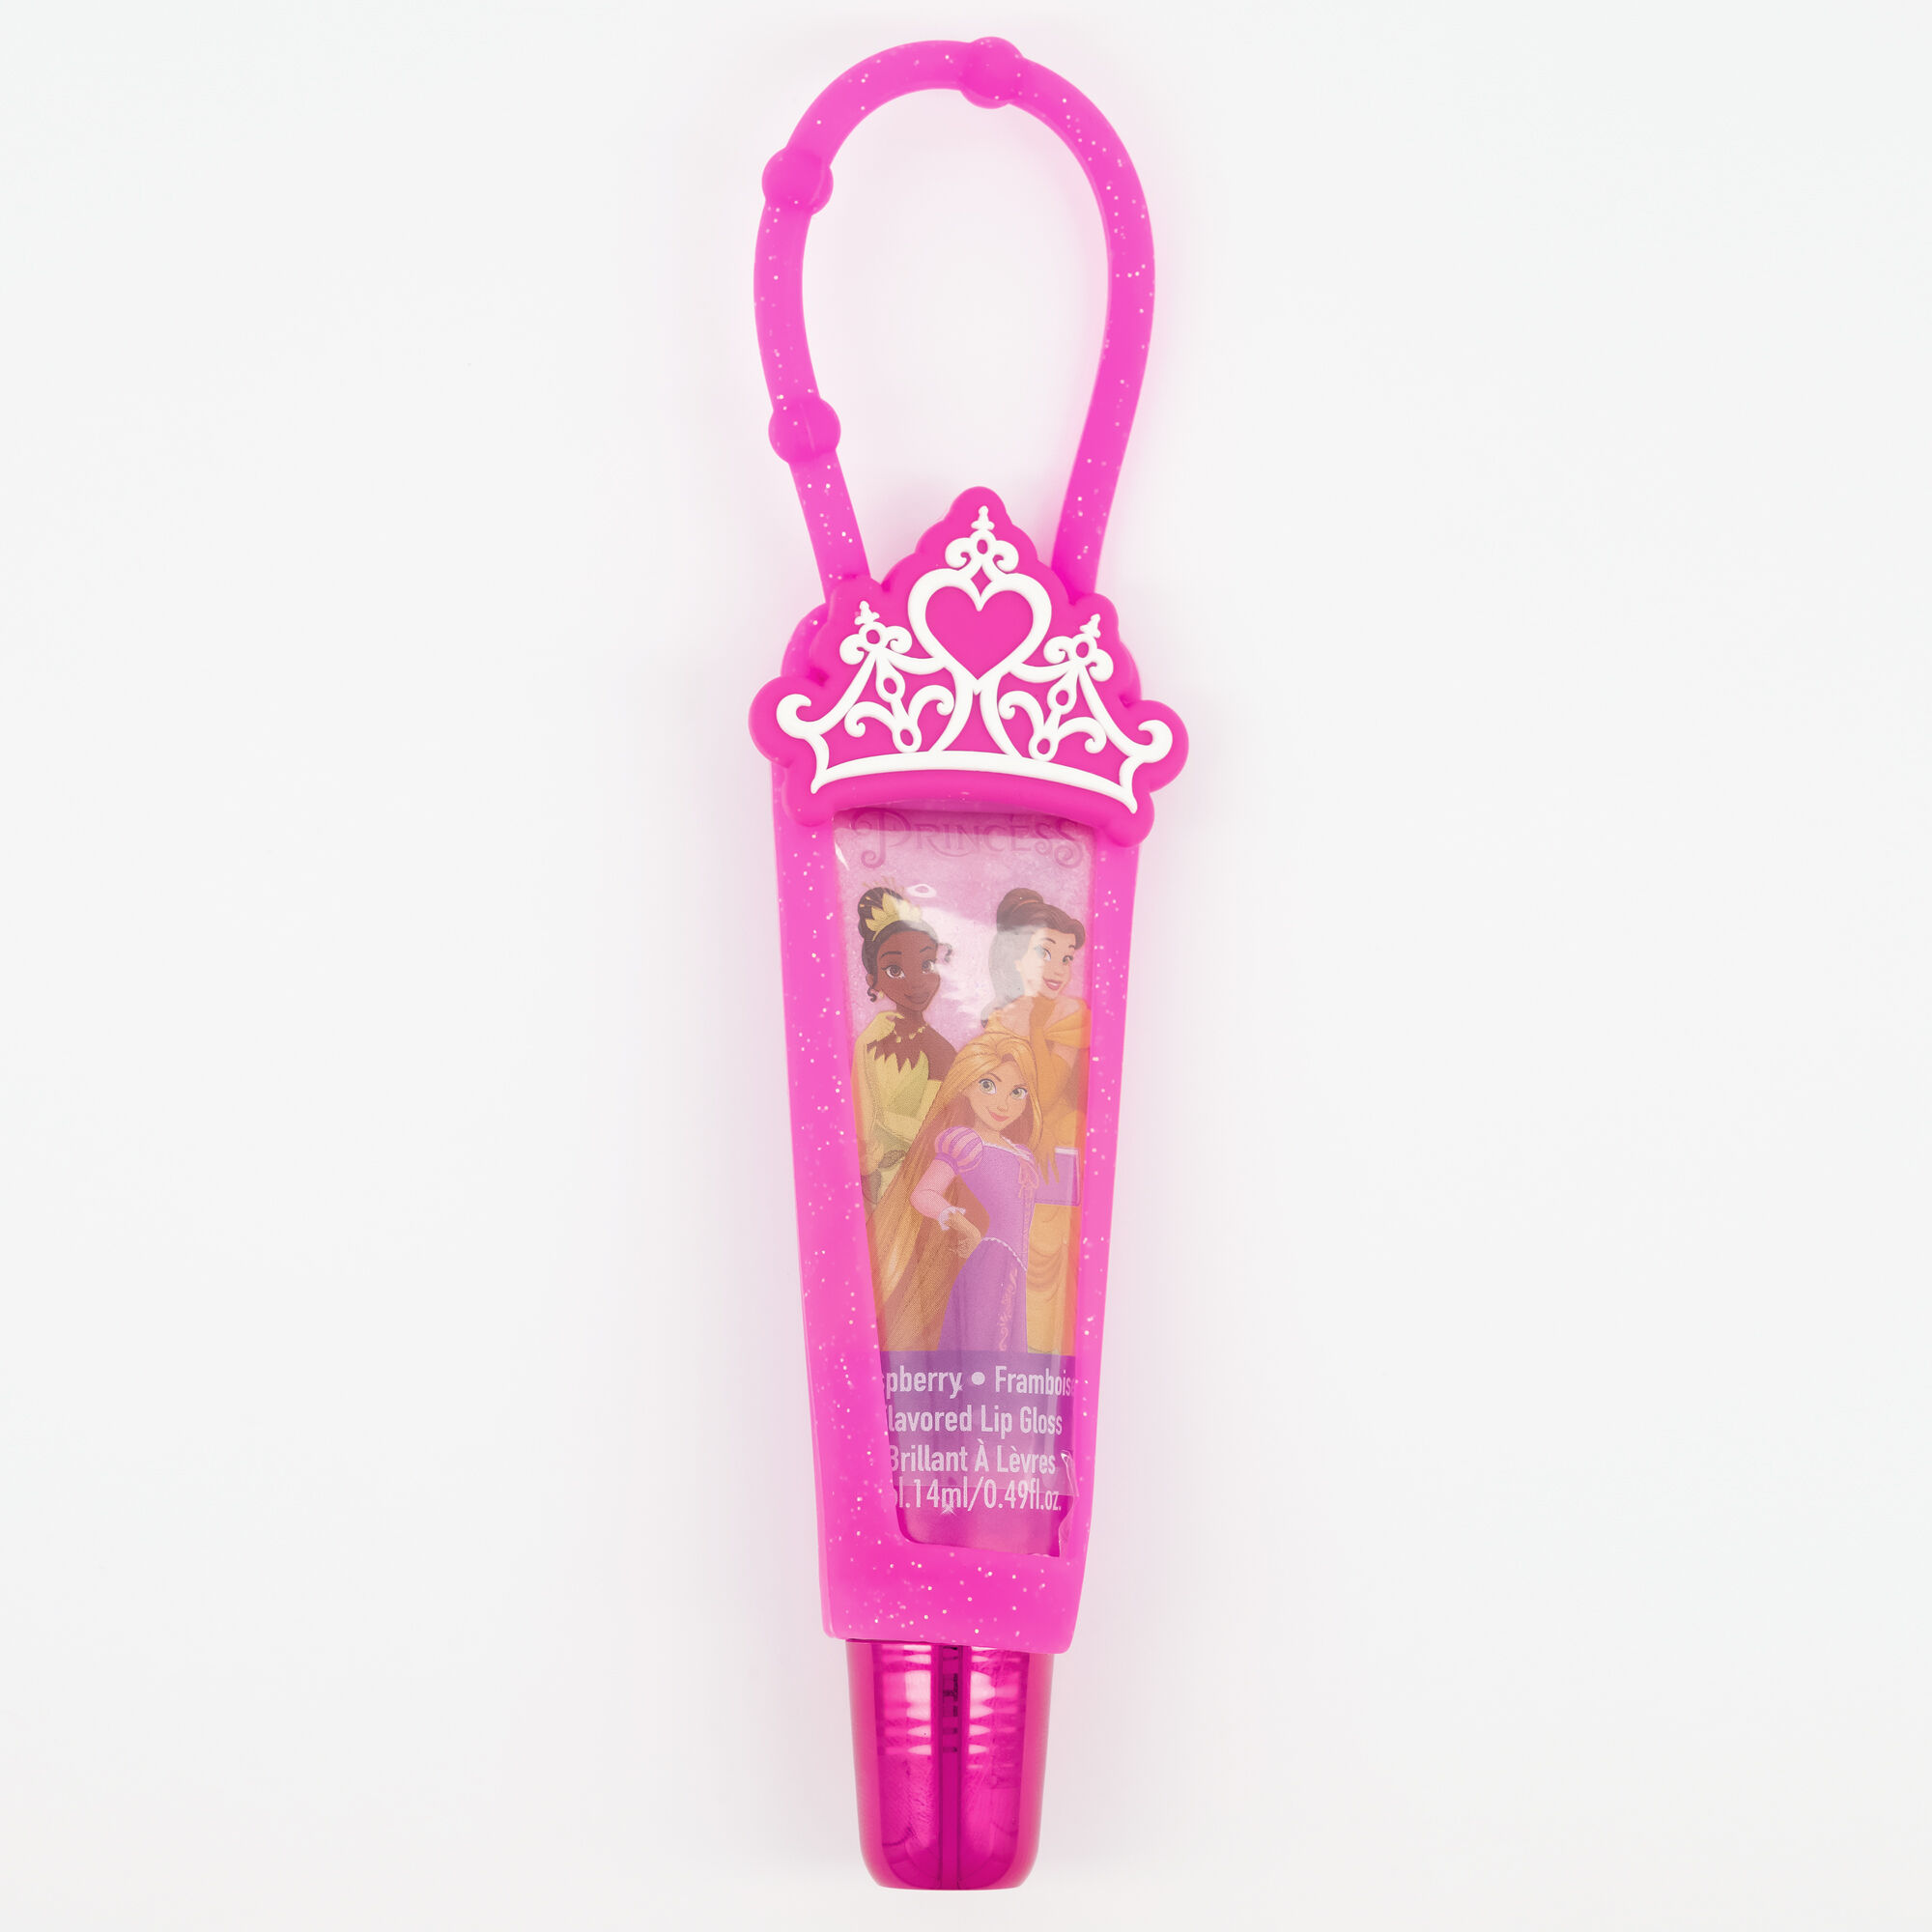 View Claires Disney Princess Lip Gloss Holder Strawberry Pink information